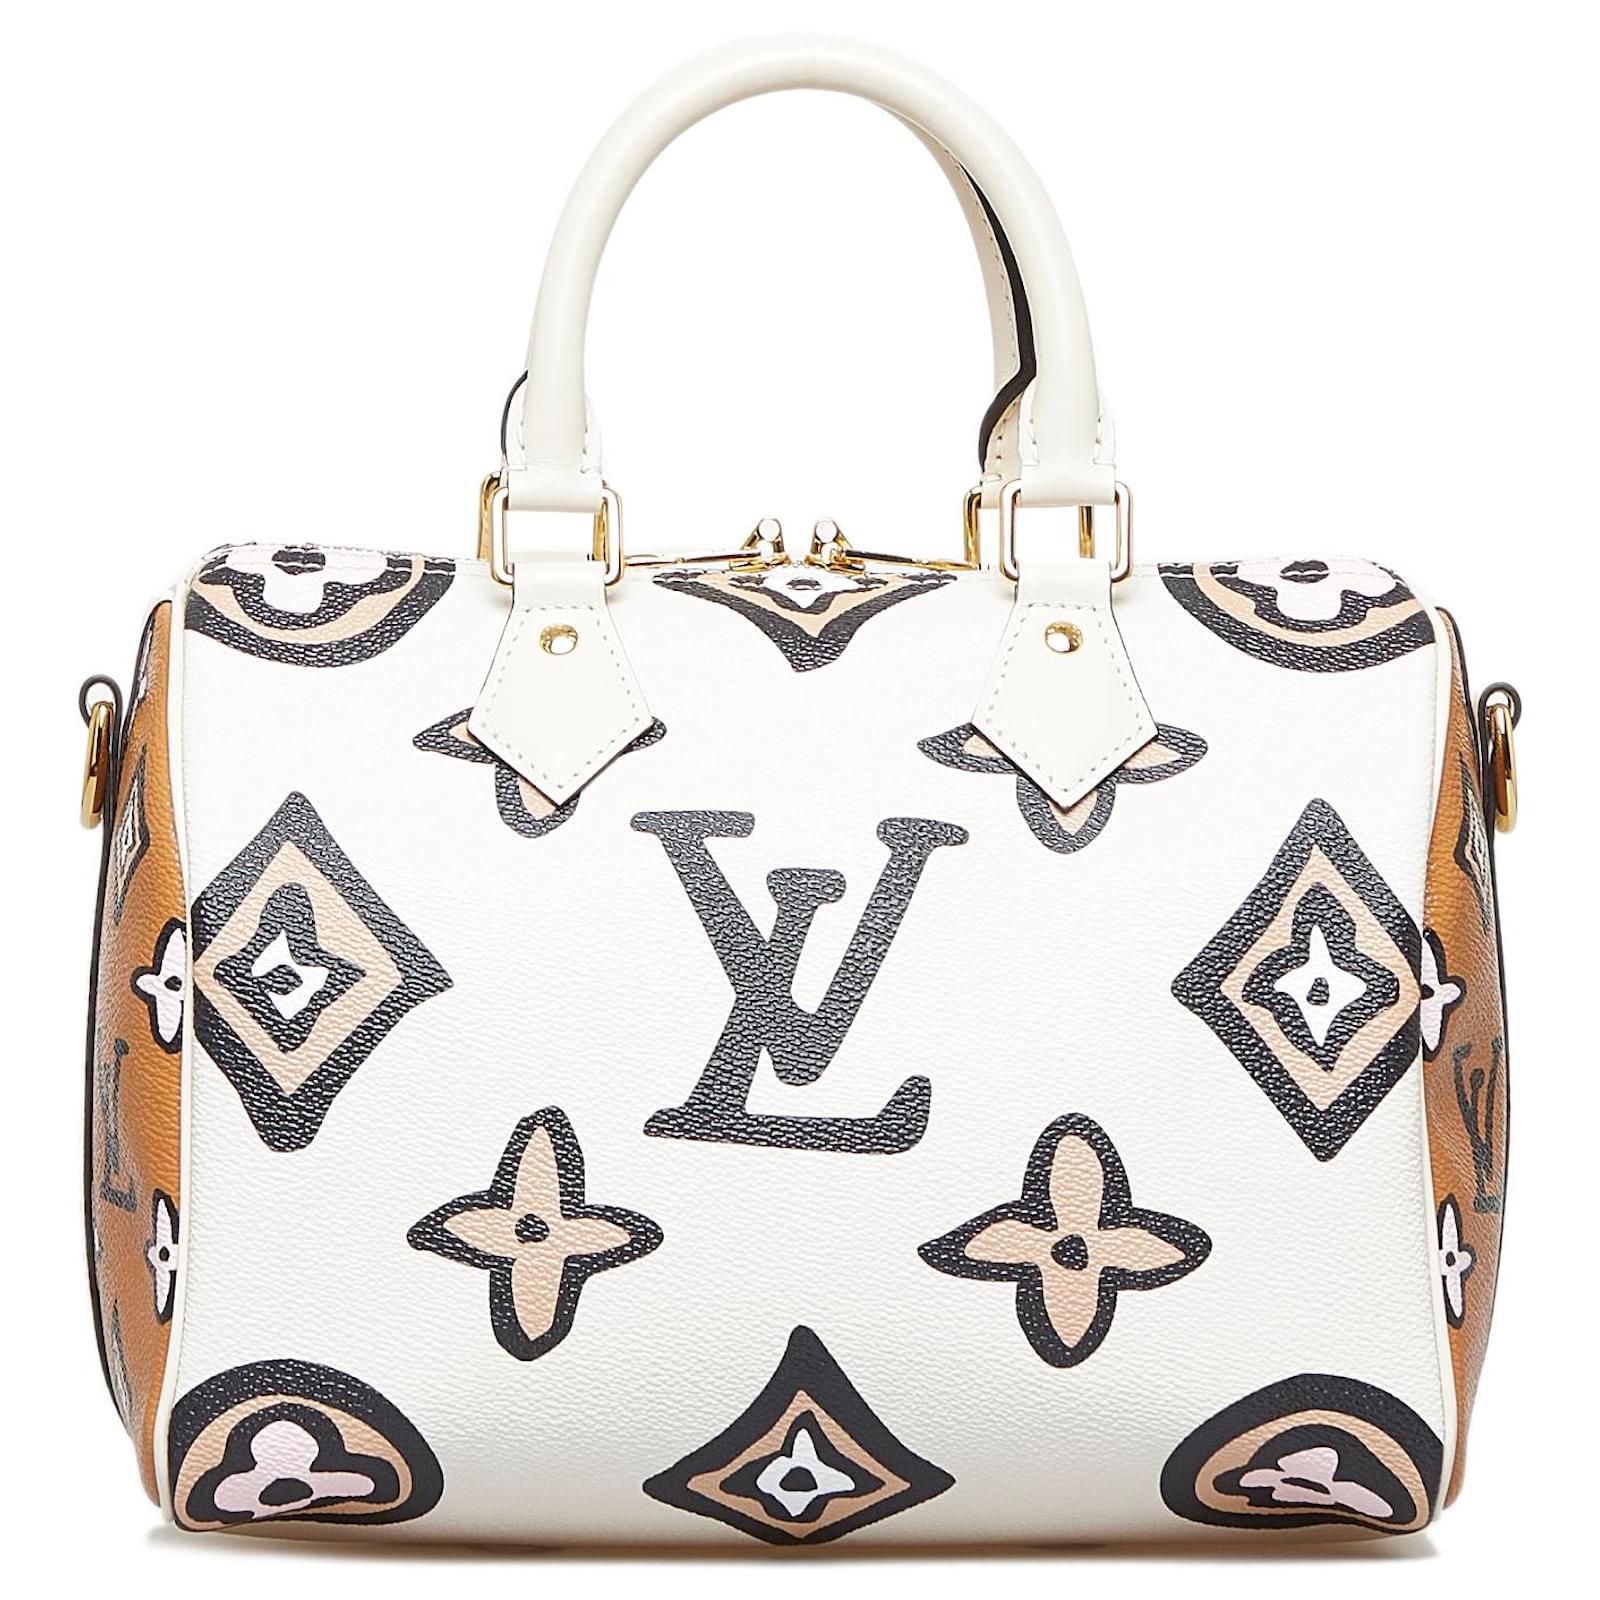 Louis Vuitton Speedy 25 Wild at heart Multiple colors Leather ref